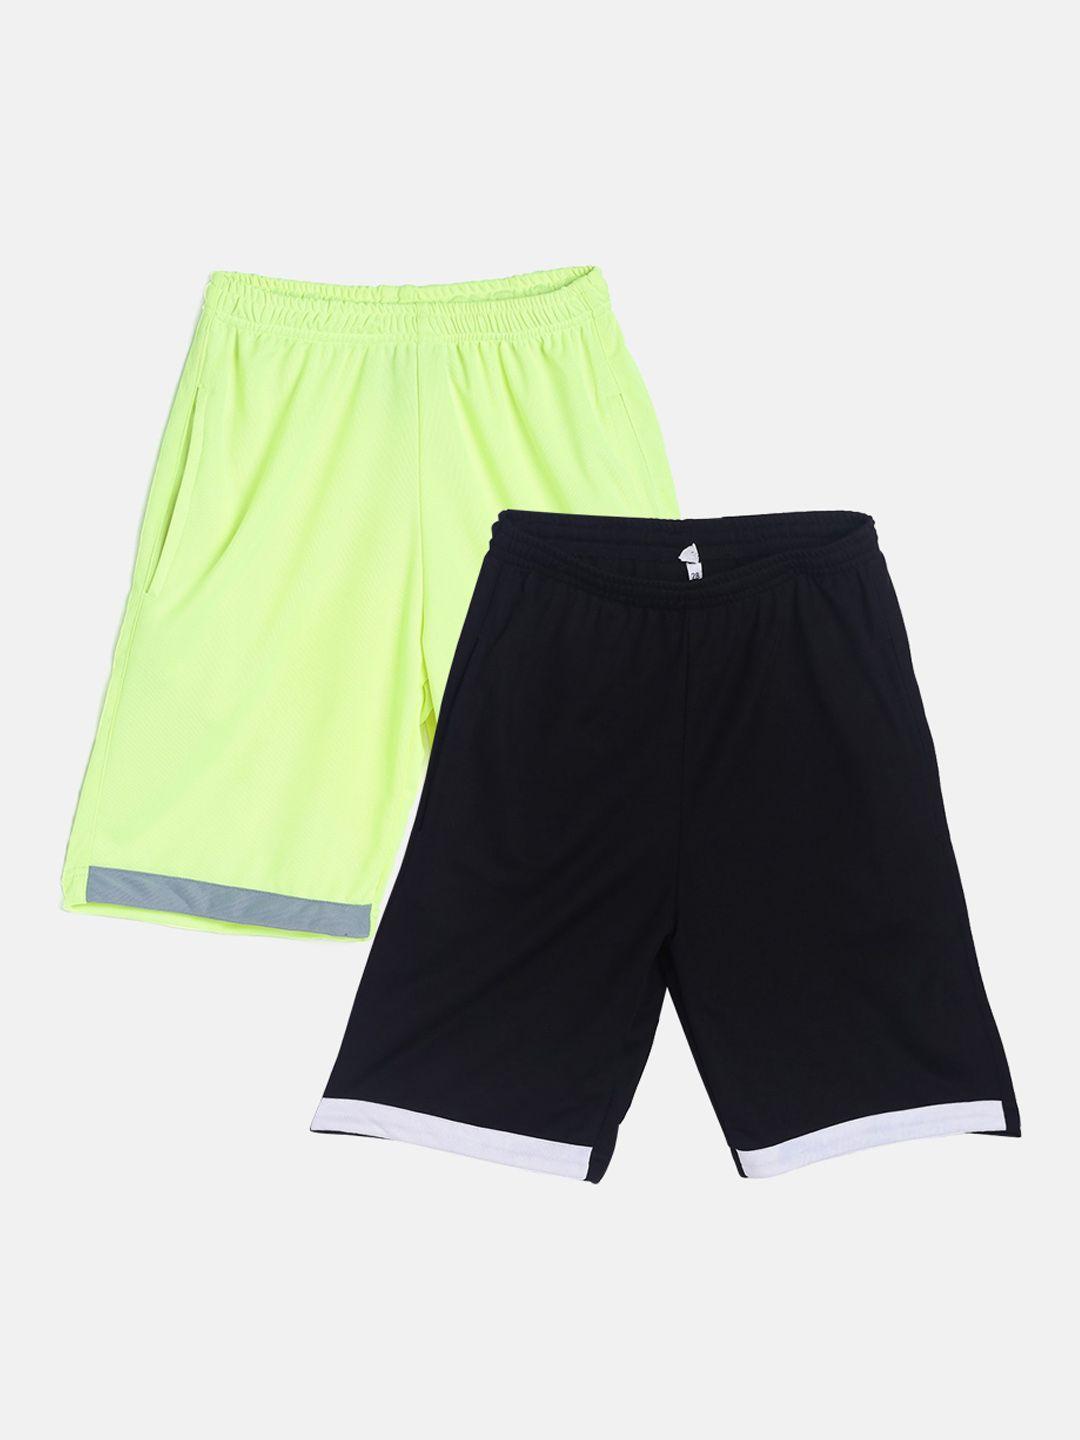 tiny hug boys pack of 2 fluorescent green & black high-rise outdoor sports shorts